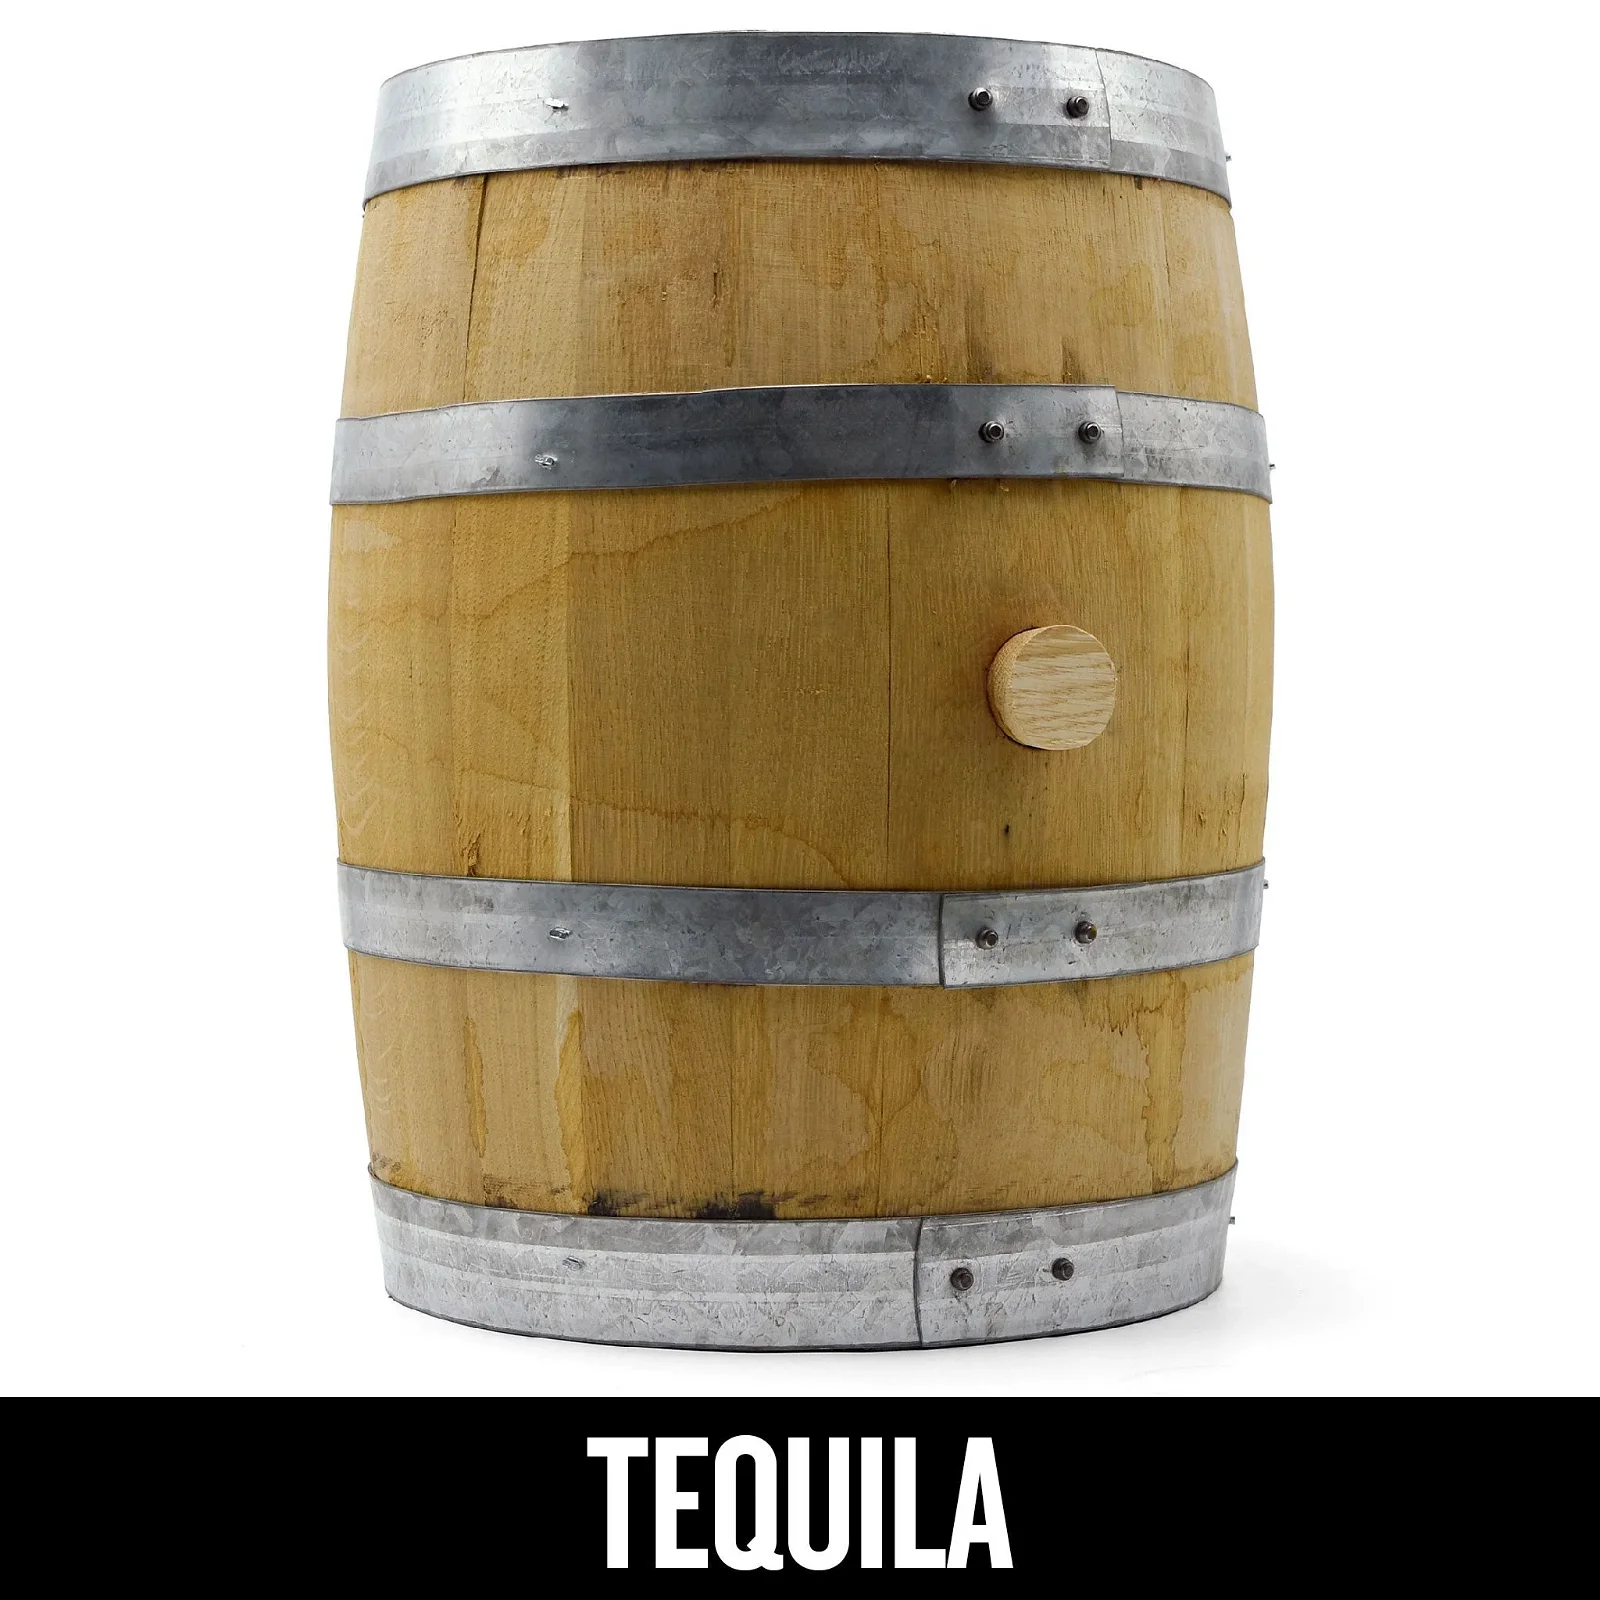 Image of Used Tequila Barrel 5 Gallon